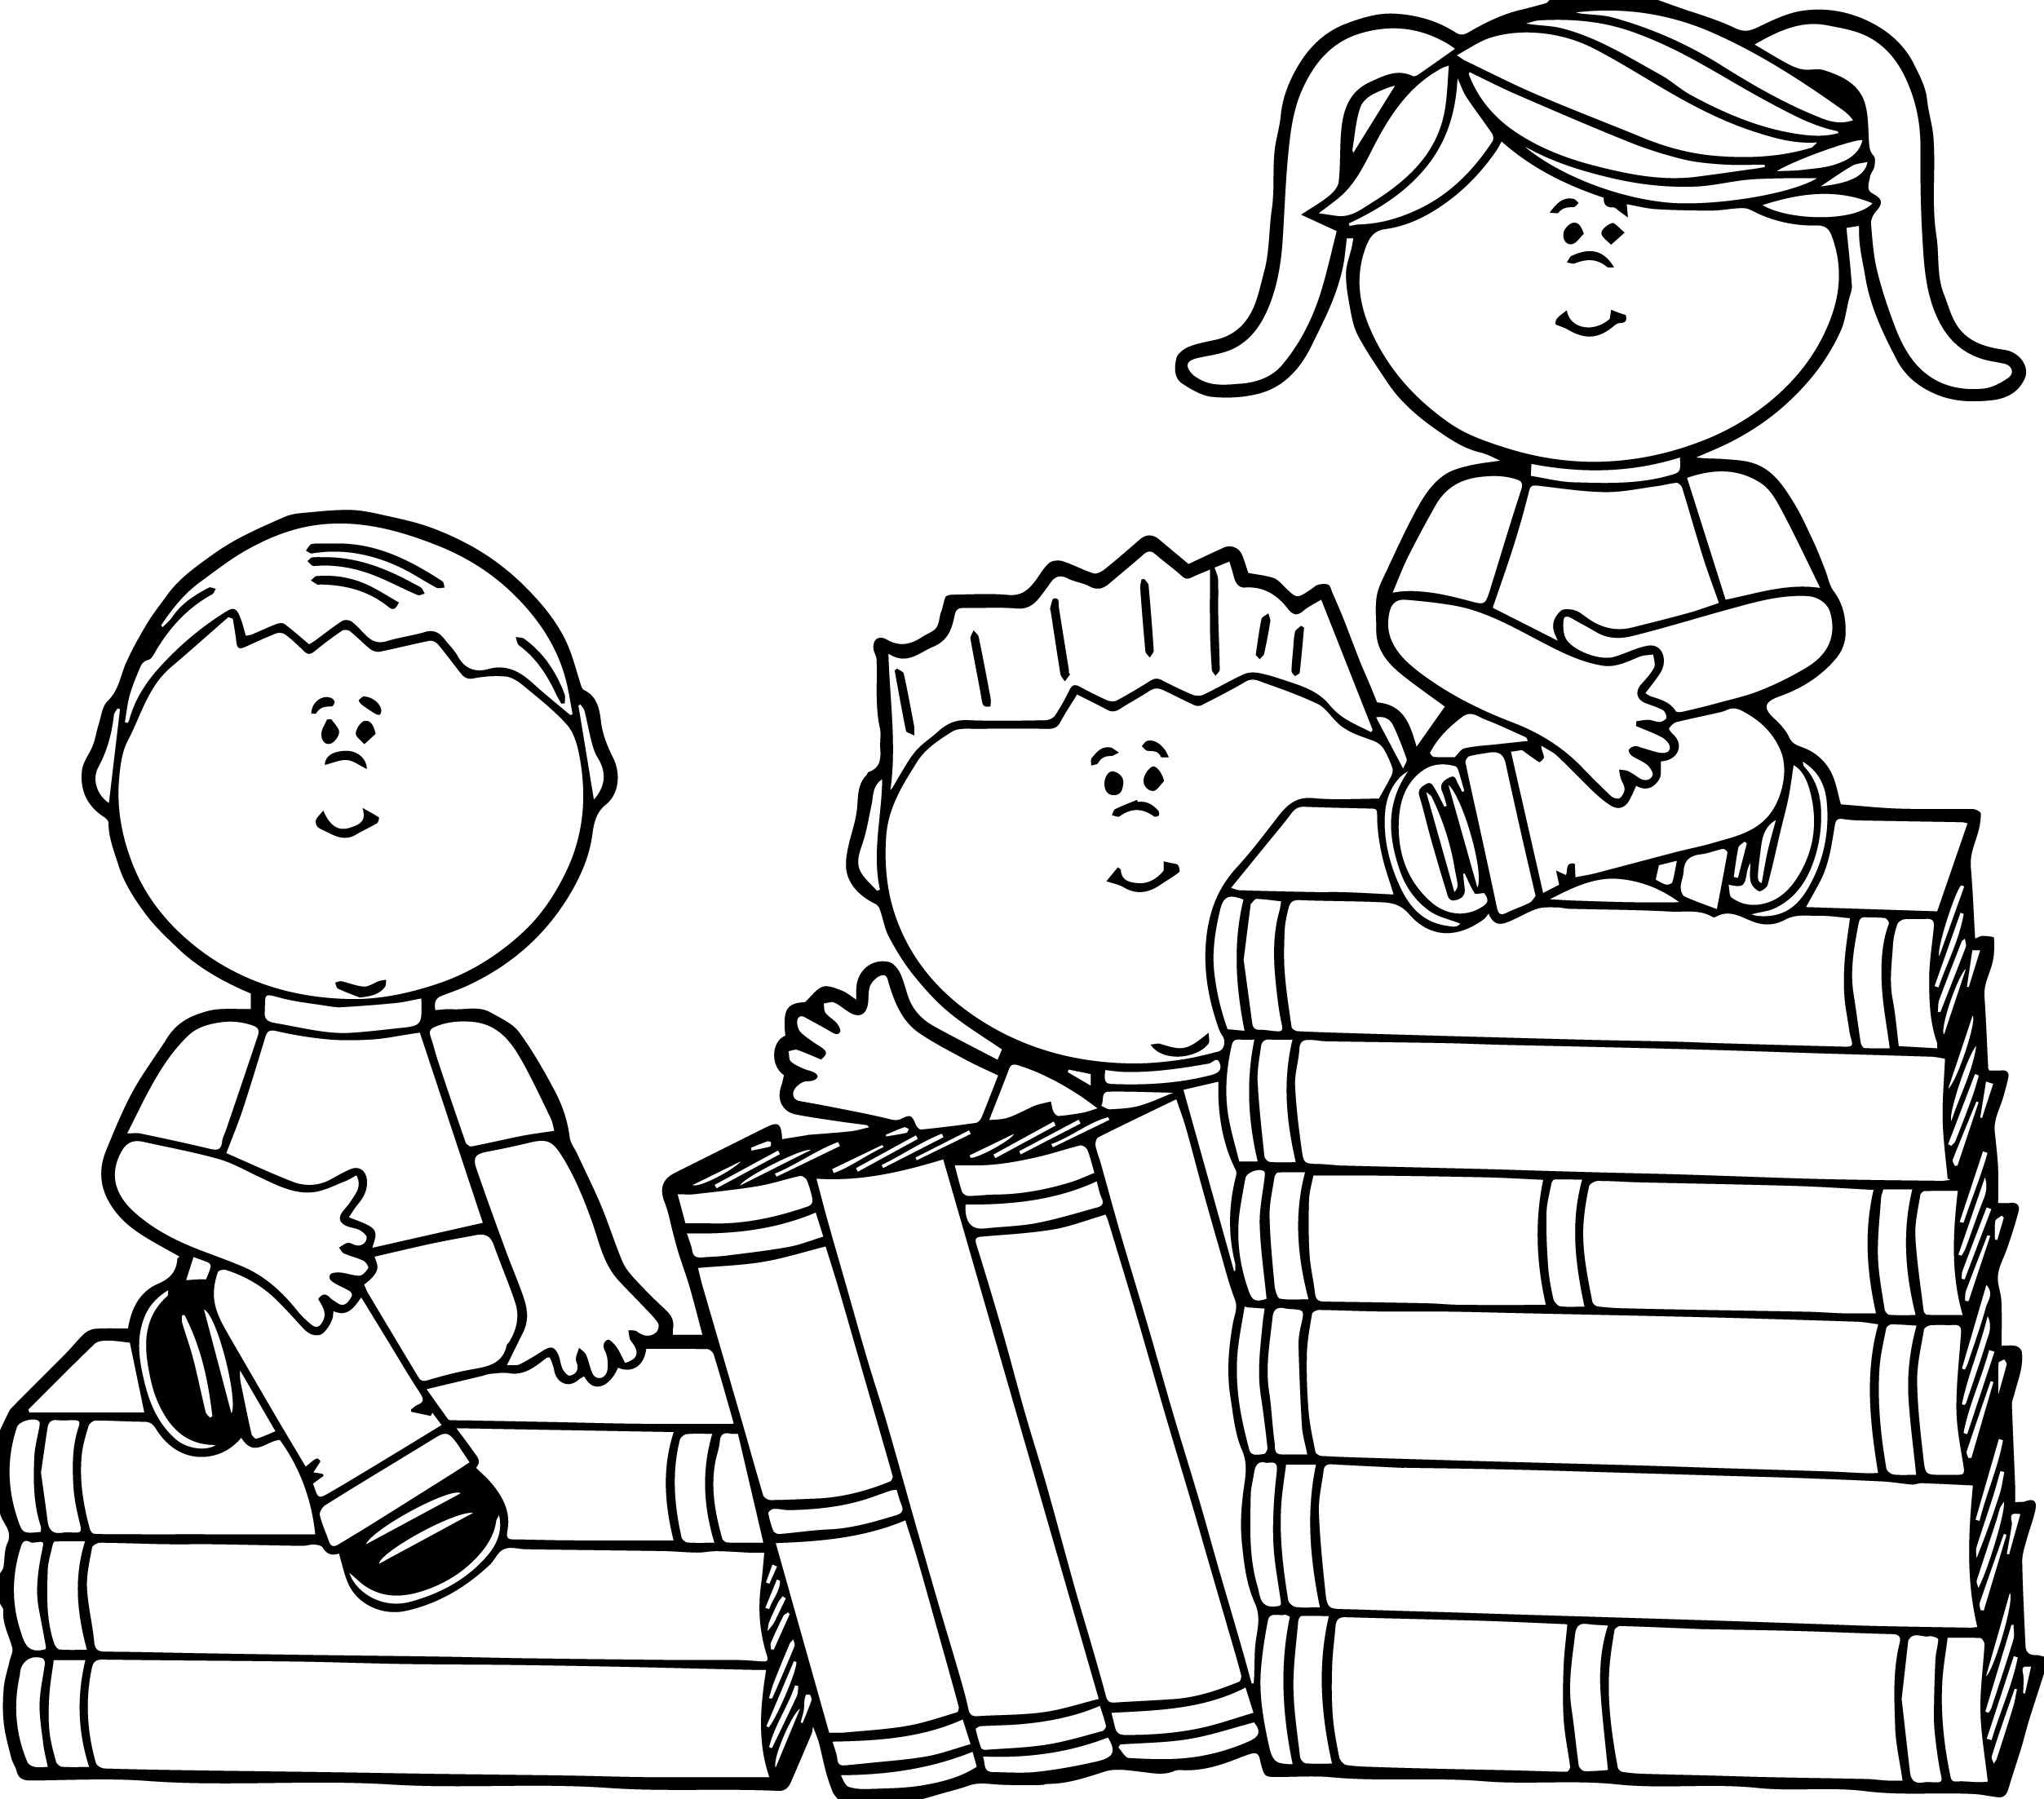 books-coloring-pages-best-coloring-pages-for-kids